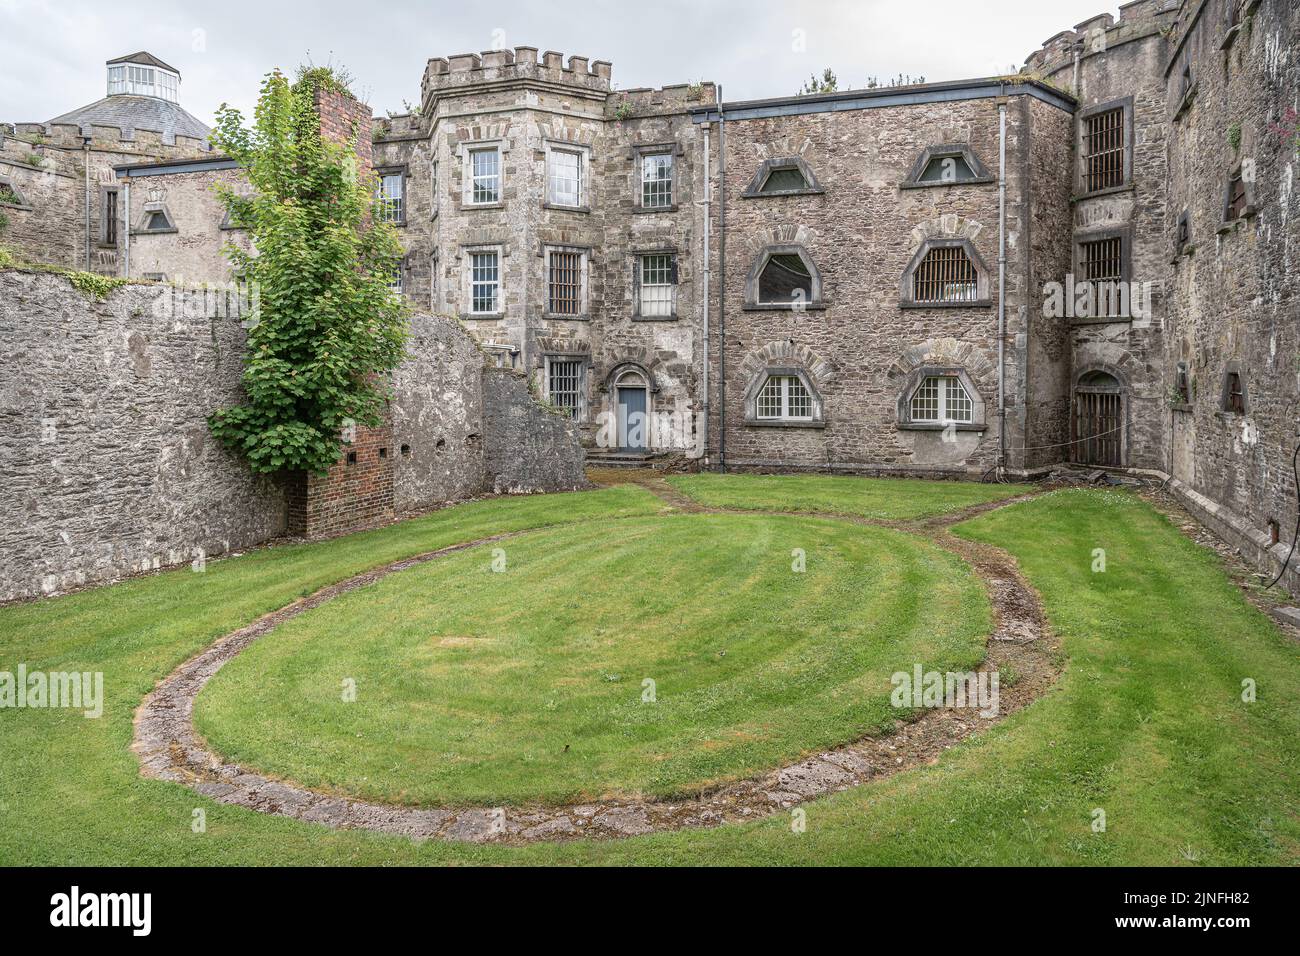 Cork City Gaol exercise area showing circular path followed by detainees, Cork, Ireland Stock Photo